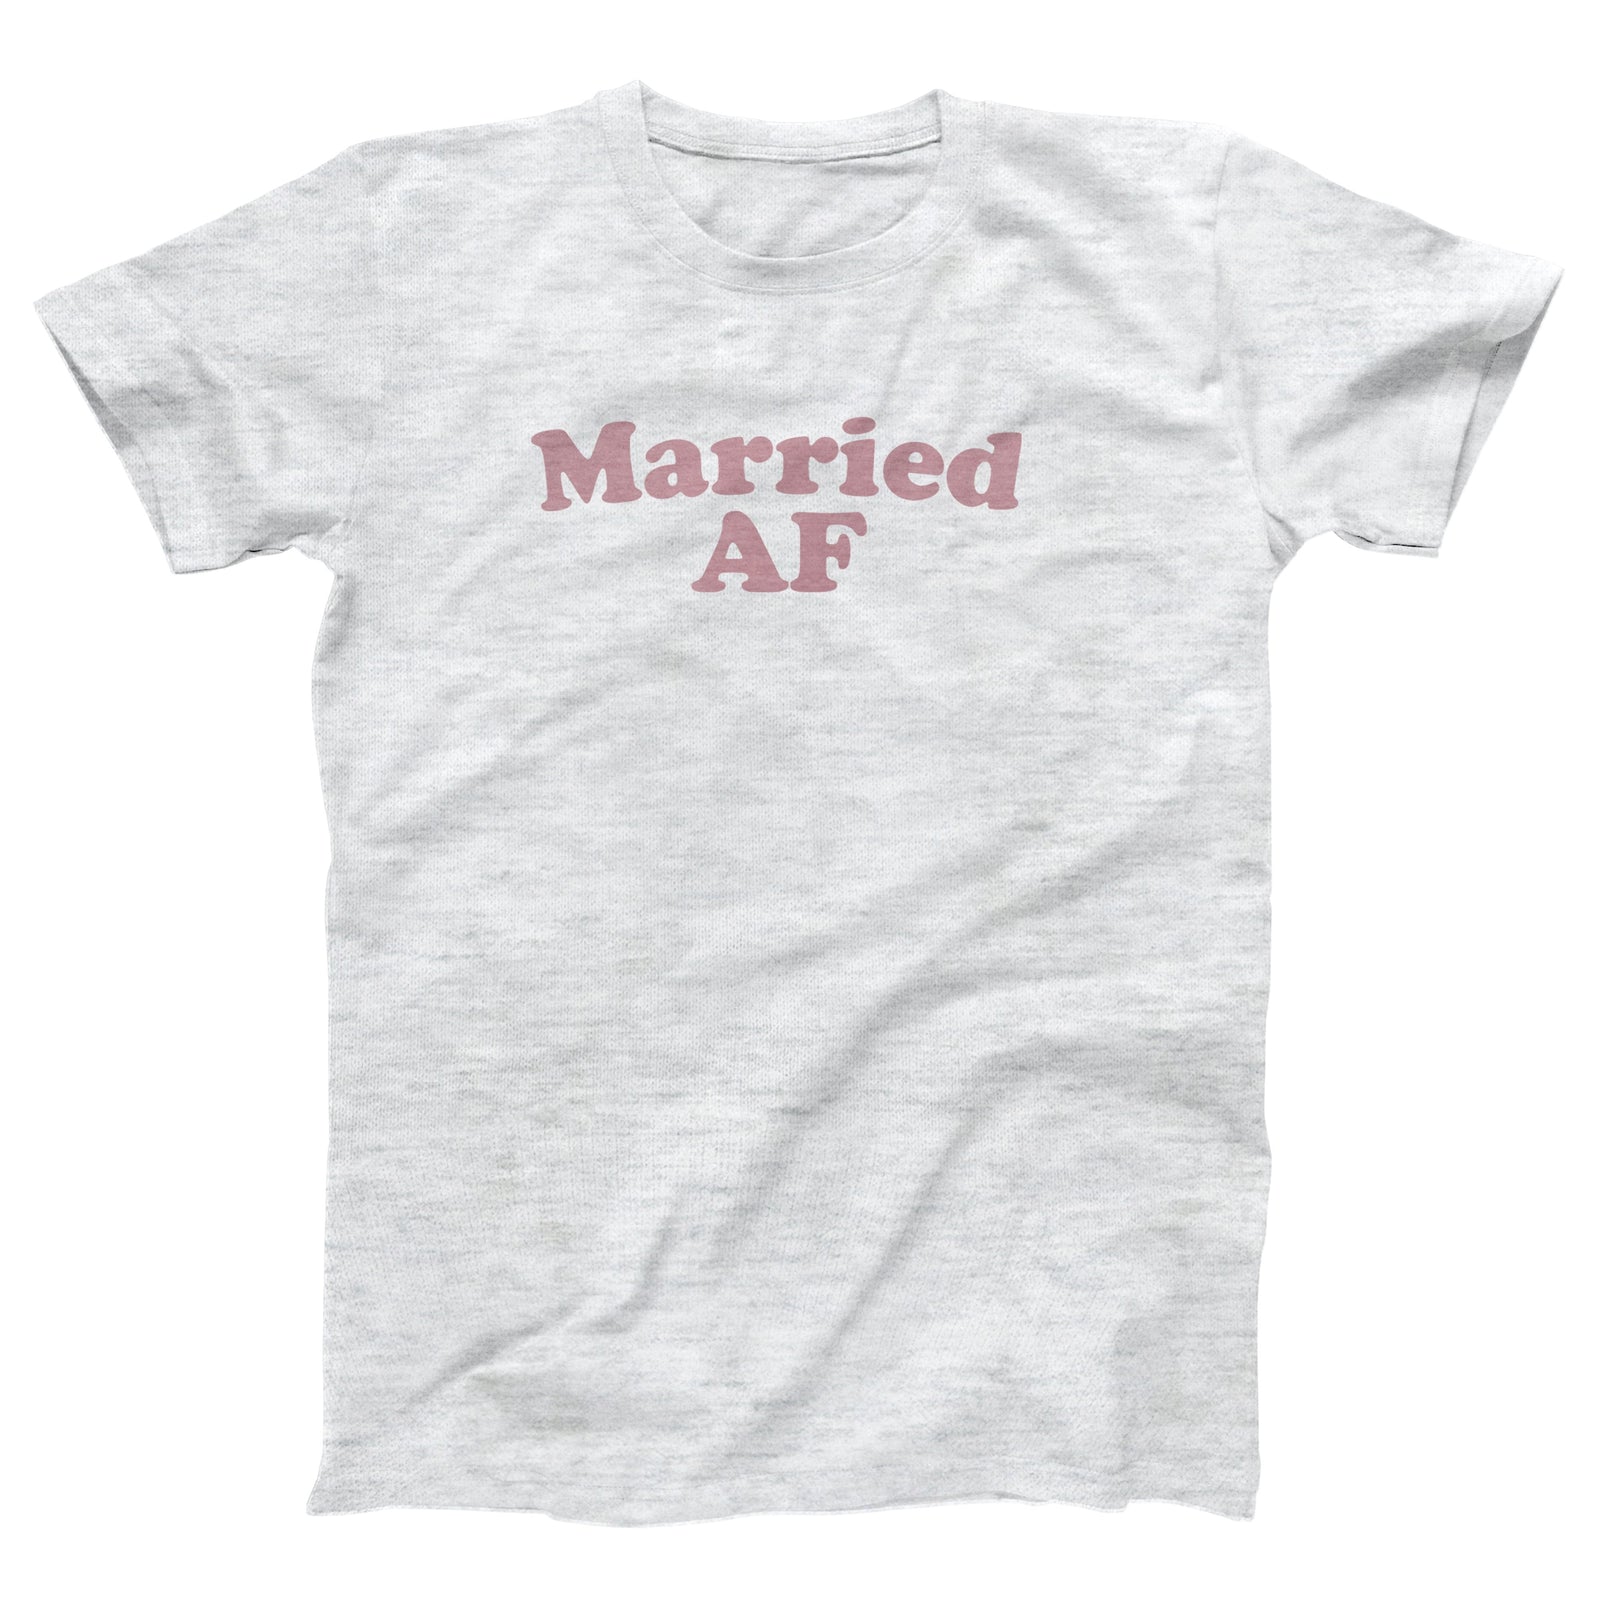 //cdn.shopify.com/s/files/1/0274/2488/2766/products/married-af-menunisex-t-shirt-704484_5000x.jpg?v=1612009620 5000w,
    //cdn.shopify.com/s/files/1/0274/2488/2766/products/married-af-menunisex-t-shirt-704484_4500x.jpg?v=1612009620 4500w,
    //cdn.shopify.com/s/files/1/0274/2488/2766/products/married-af-menunisex-t-shirt-704484_4000x.jpg?v=1612009620 4000w,
    //cdn.shopify.com/s/files/1/0274/2488/2766/products/married-af-menunisex-t-shirt-704484_3500x.jpg?v=1612009620 3500w,
    //cdn.shopify.com/s/files/1/0274/2488/2766/products/married-af-menunisex-t-shirt-704484_3000x.jpg?v=1612009620 3000w,
    //cdn.shopify.com/s/files/1/0274/2488/2766/products/married-af-menunisex-t-shirt-704484_2500x.jpg?v=1612009620 2500w,
    //cdn.shopify.com/s/files/1/0274/2488/2766/products/married-af-menunisex-t-shirt-704484_2000x.jpg?v=1612009620 2000w,
    //cdn.shopify.com/s/files/1/0274/2488/2766/products/married-af-menunisex-t-shirt-704484_1800x.jpg?v=1612009620 1800w,
    //cdn.shopify.com/s/files/1/0274/2488/2766/products/married-af-menunisex-t-shirt-704484_1600x.jpg?v=1612009620 1600w,
    //cdn.shopify.com/s/files/1/0274/2488/2766/products/married-af-menunisex-t-shirt-704484_1400x.jpg?v=1612009620 1400w,
    //cdn.shopify.com/s/files/1/0274/2488/2766/products/married-af-menunisex-t-shirt-704484_1200x.jpg?v=1612009620 1200w,
    //cdn.shopify.com/s/files/1/0274/2488/2766/products/married-af-menunisex-t-shirt-704484_1000x.jpg?v=1612009620 1000w,
    //cdn.shopify.com/s/files/1/0274/2488/2766/products/married-af-menunisex-t-shirt-704484_800x.jpg?v=1612009620 800w,
    //cdn.shopify.com/s/files/1/0274/2488/2766/products/married-af-menunisex-t-shirt-704484_600x.jpg?v=1612009620 600w,
    //cdn.shopify.com/s/files/1/0274/2488/2766/products/married-af-menunisex-t-shirt-704484_400x.jpg?v=1612009620 400w,
    //cdn.shopify.com/s/files/1/0274/2488/2766/products/married-af-menunisex-t-shirt-704484_200x.jpg?v=1612009620 200w